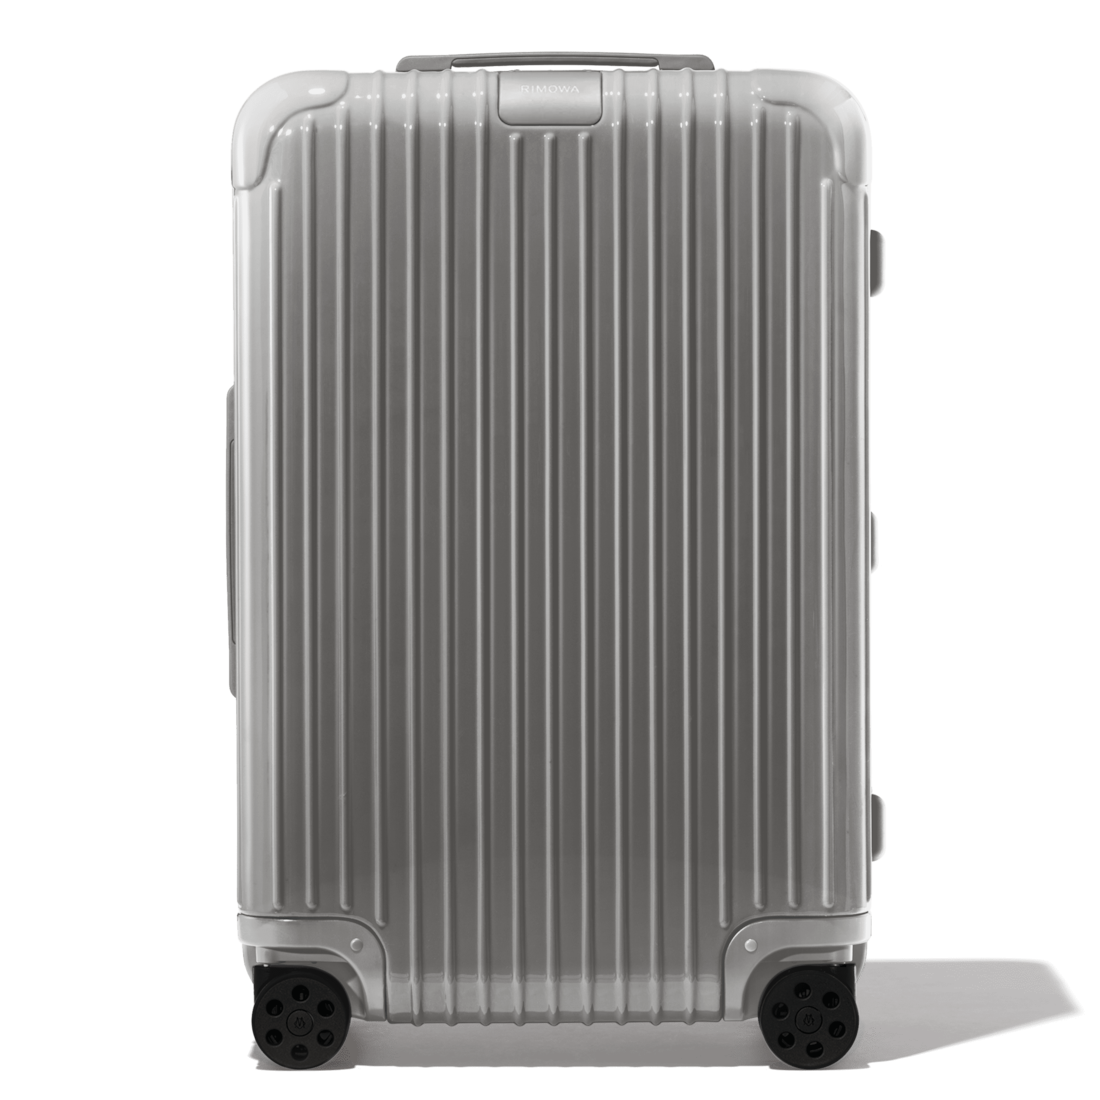 Essential Check-In M Lightweight Suitcase, Slate grey